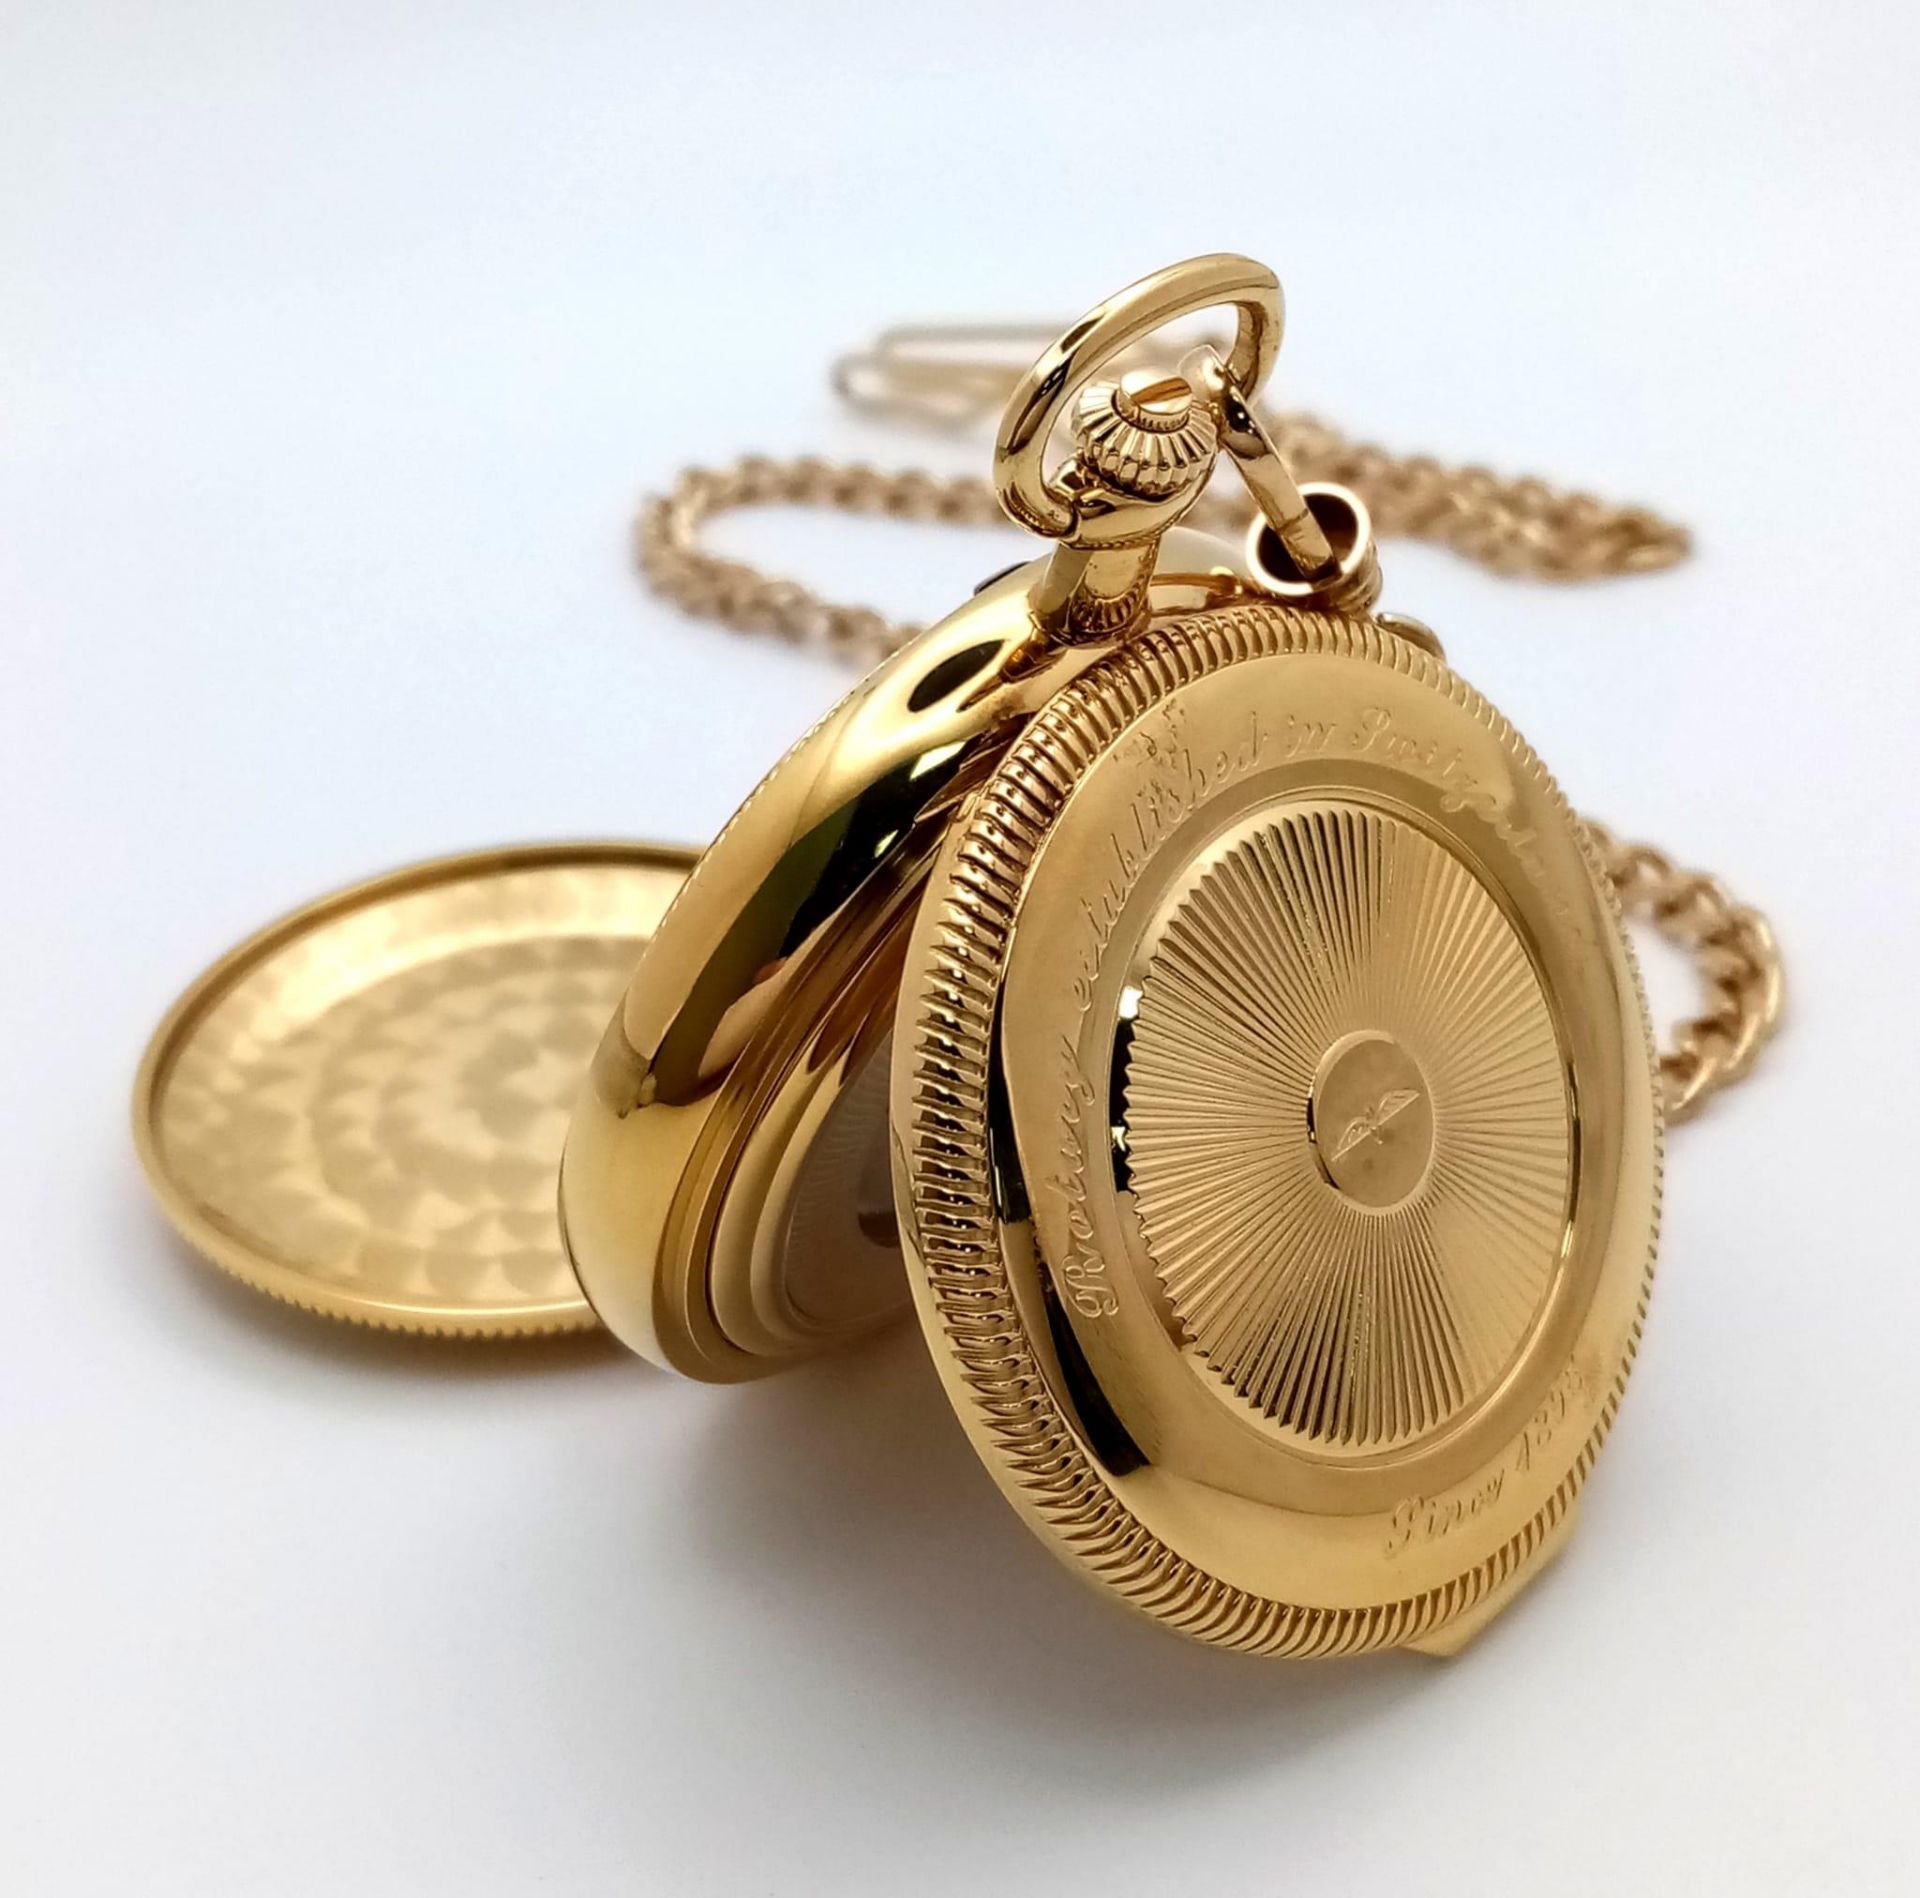 An Unworn Gold Plated Rotary Manual Wind Pocket, Date Watch. 4 Day Power Reserve. With Albert Chain. - Image 3 of 8